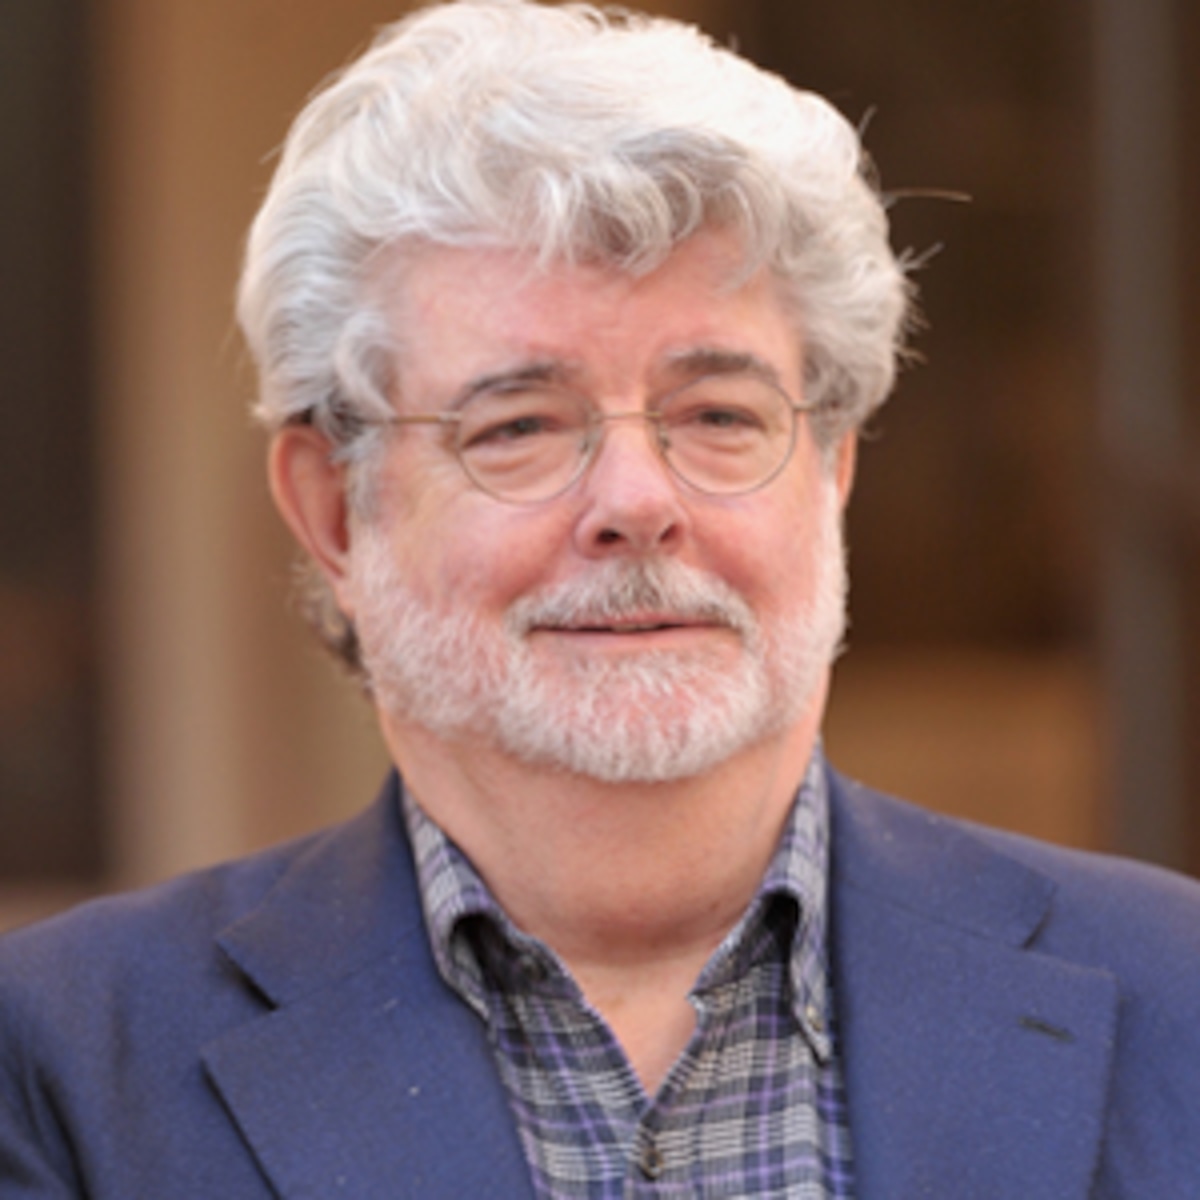 Happy Birthday, George Lucas!
May 14th 1944 